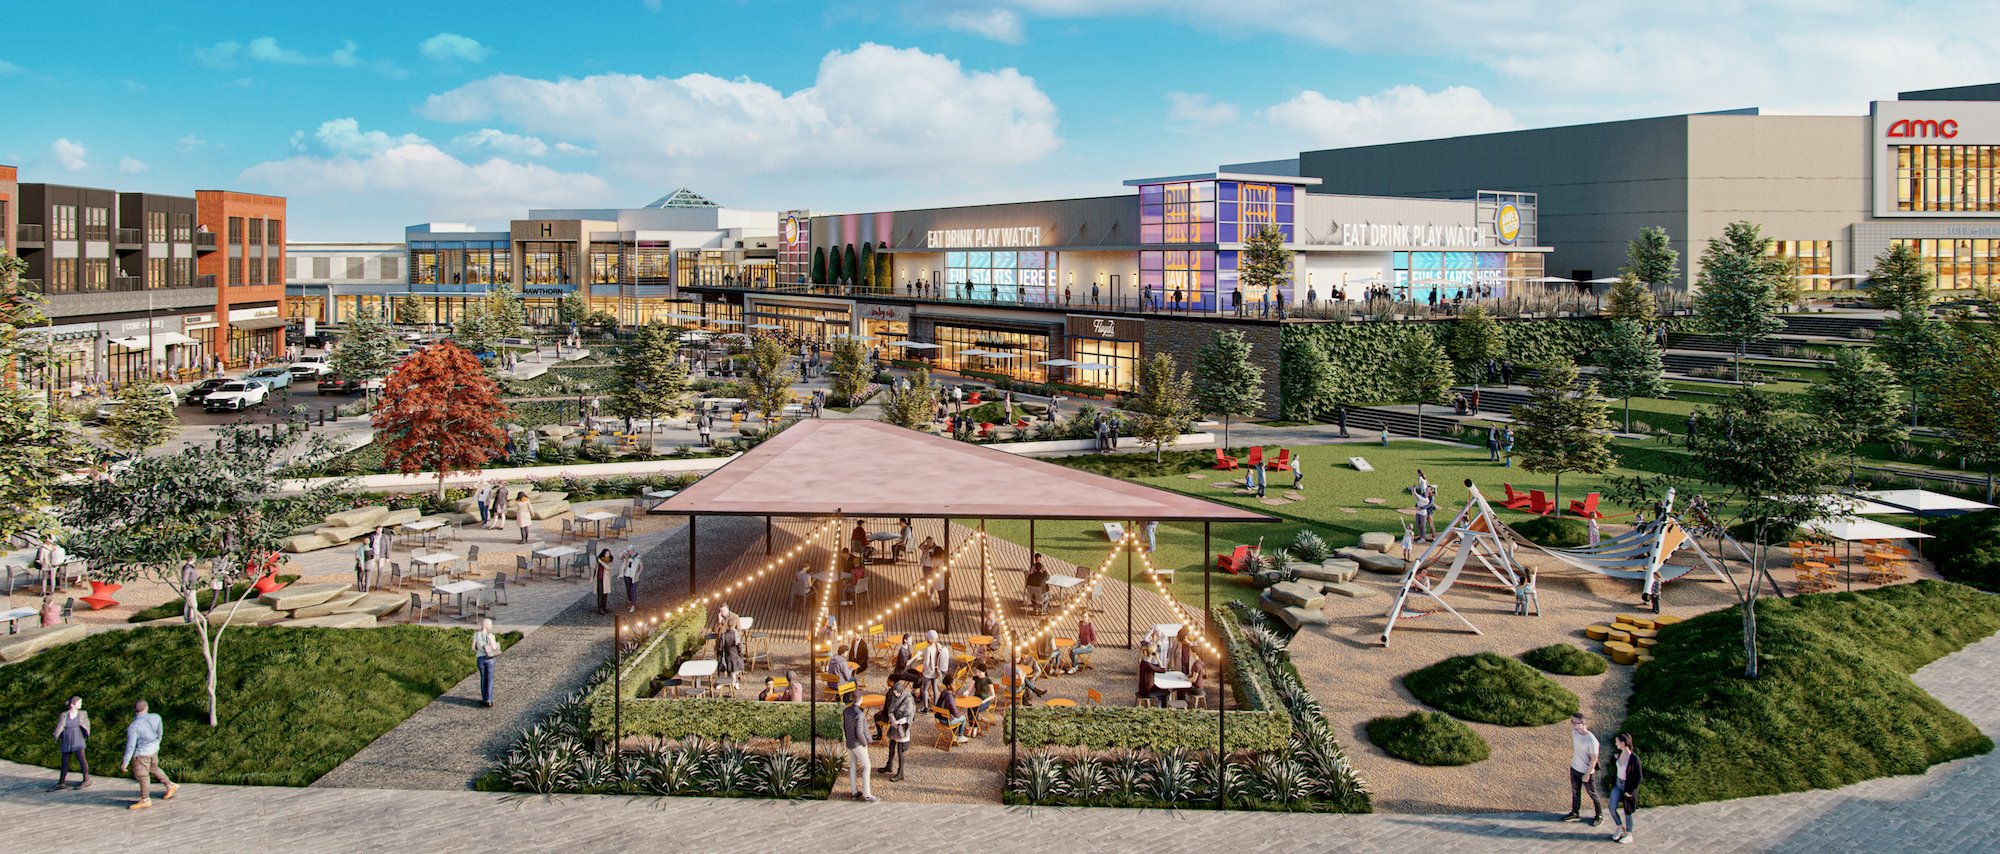 Shopping Malls Being Reborn as ‘Micro-Cities’ by a New Wave of Investors